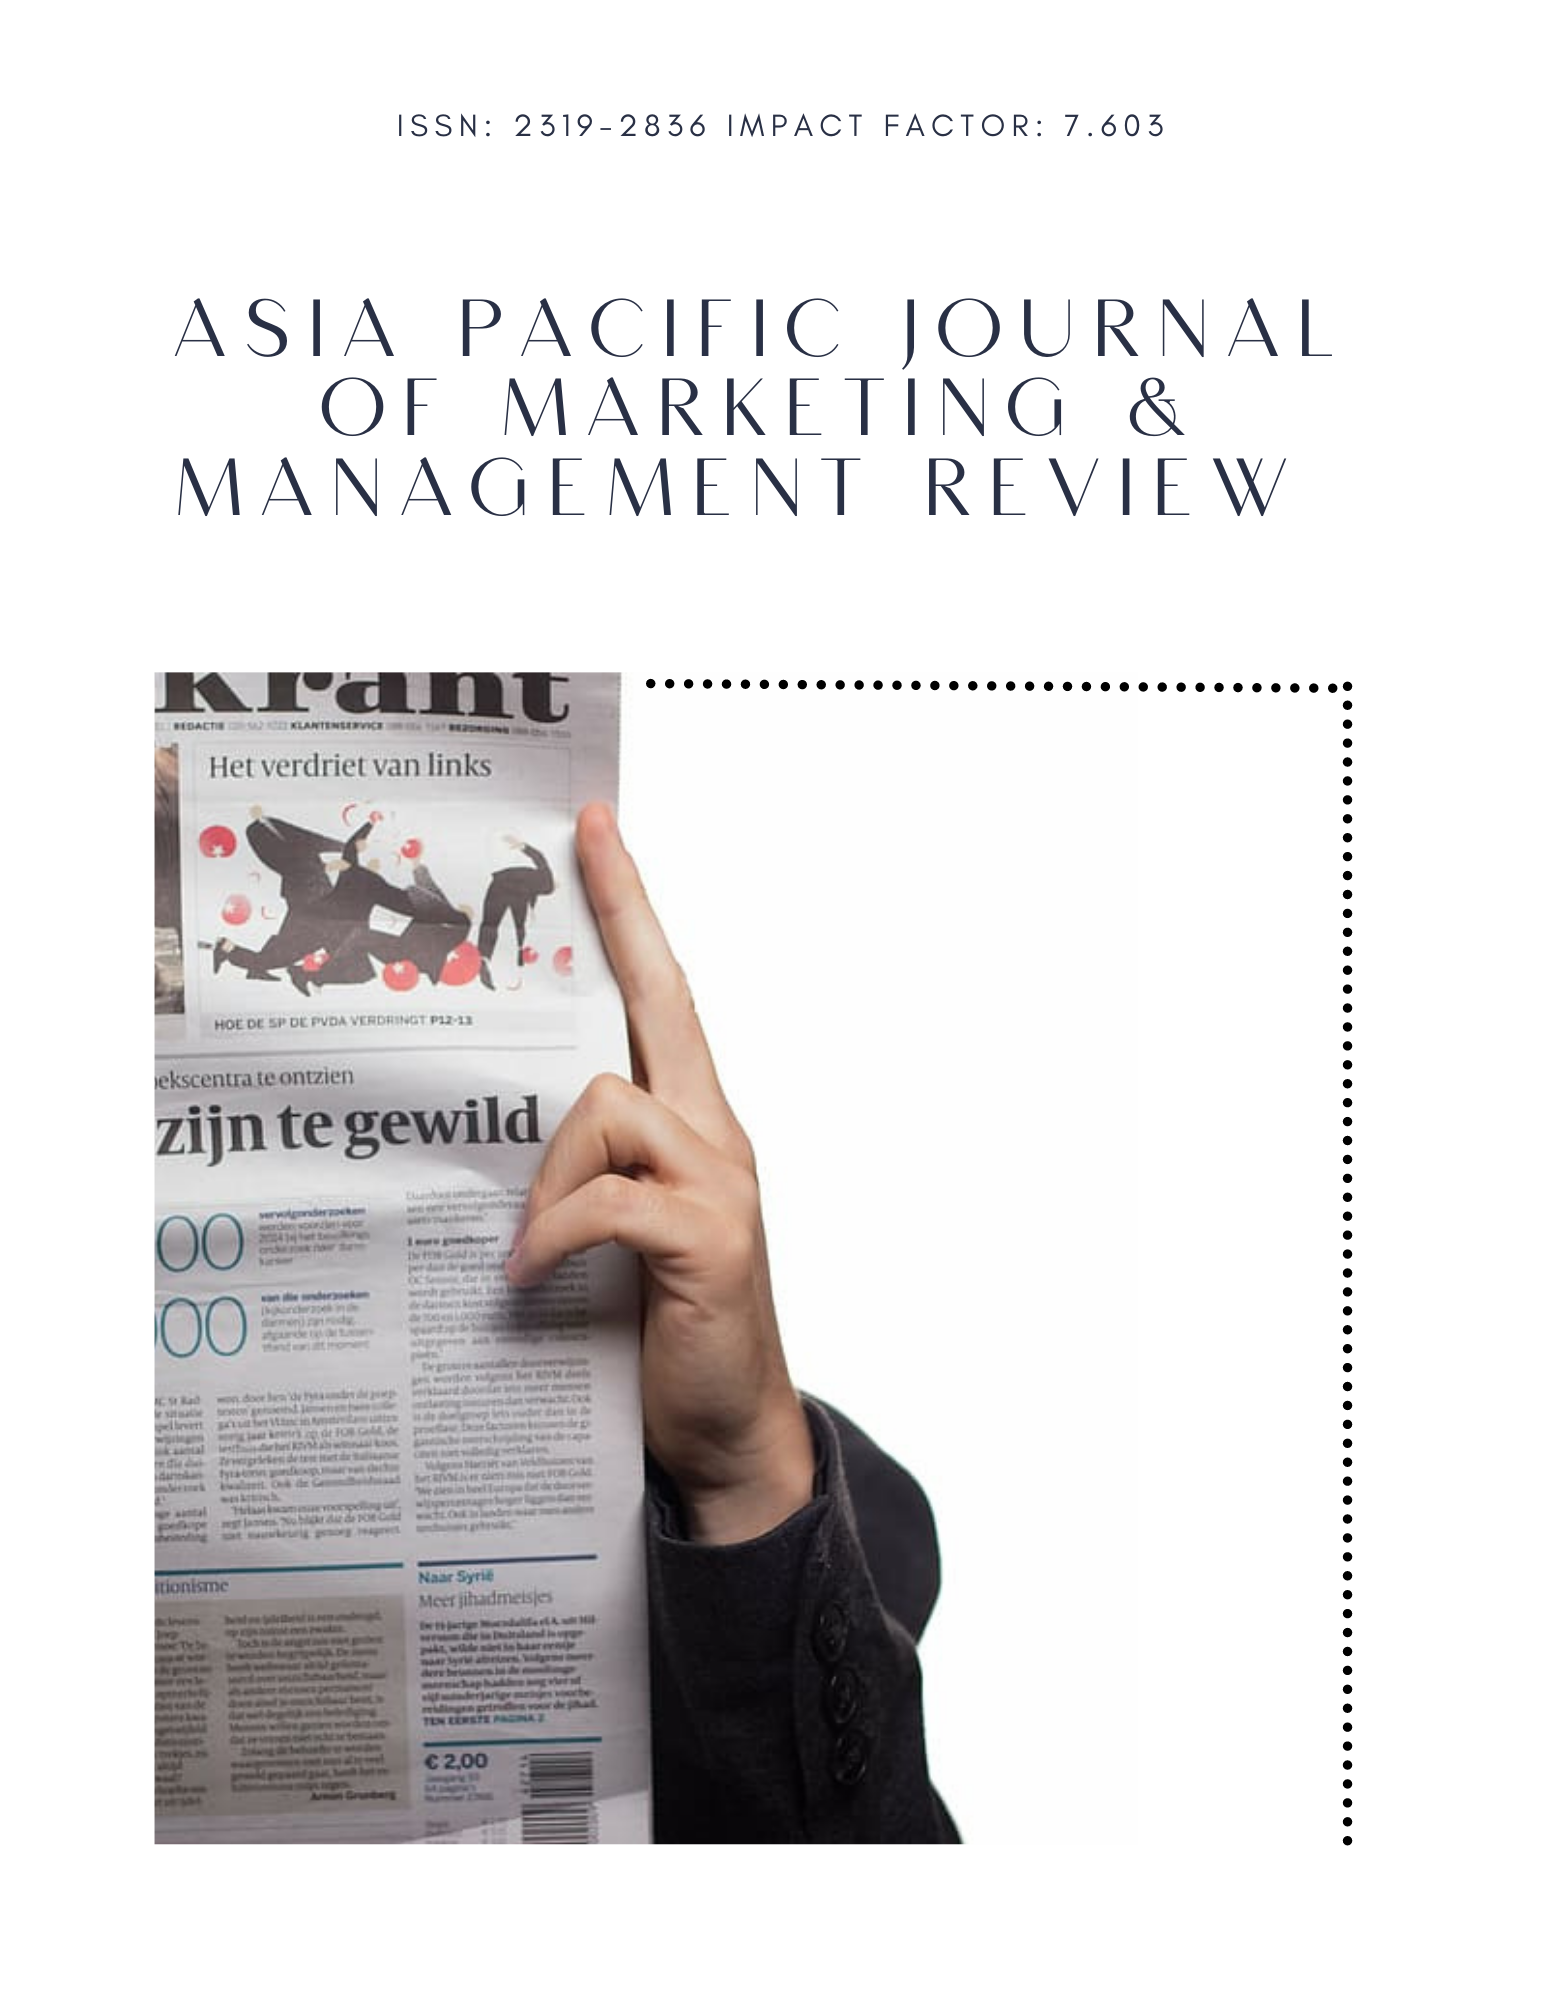 					View Vol. 11 No. 03 (2022): ASIA PACIFIC JOURNAL OF MARKETING & MANAGEMENT REVIEW
				